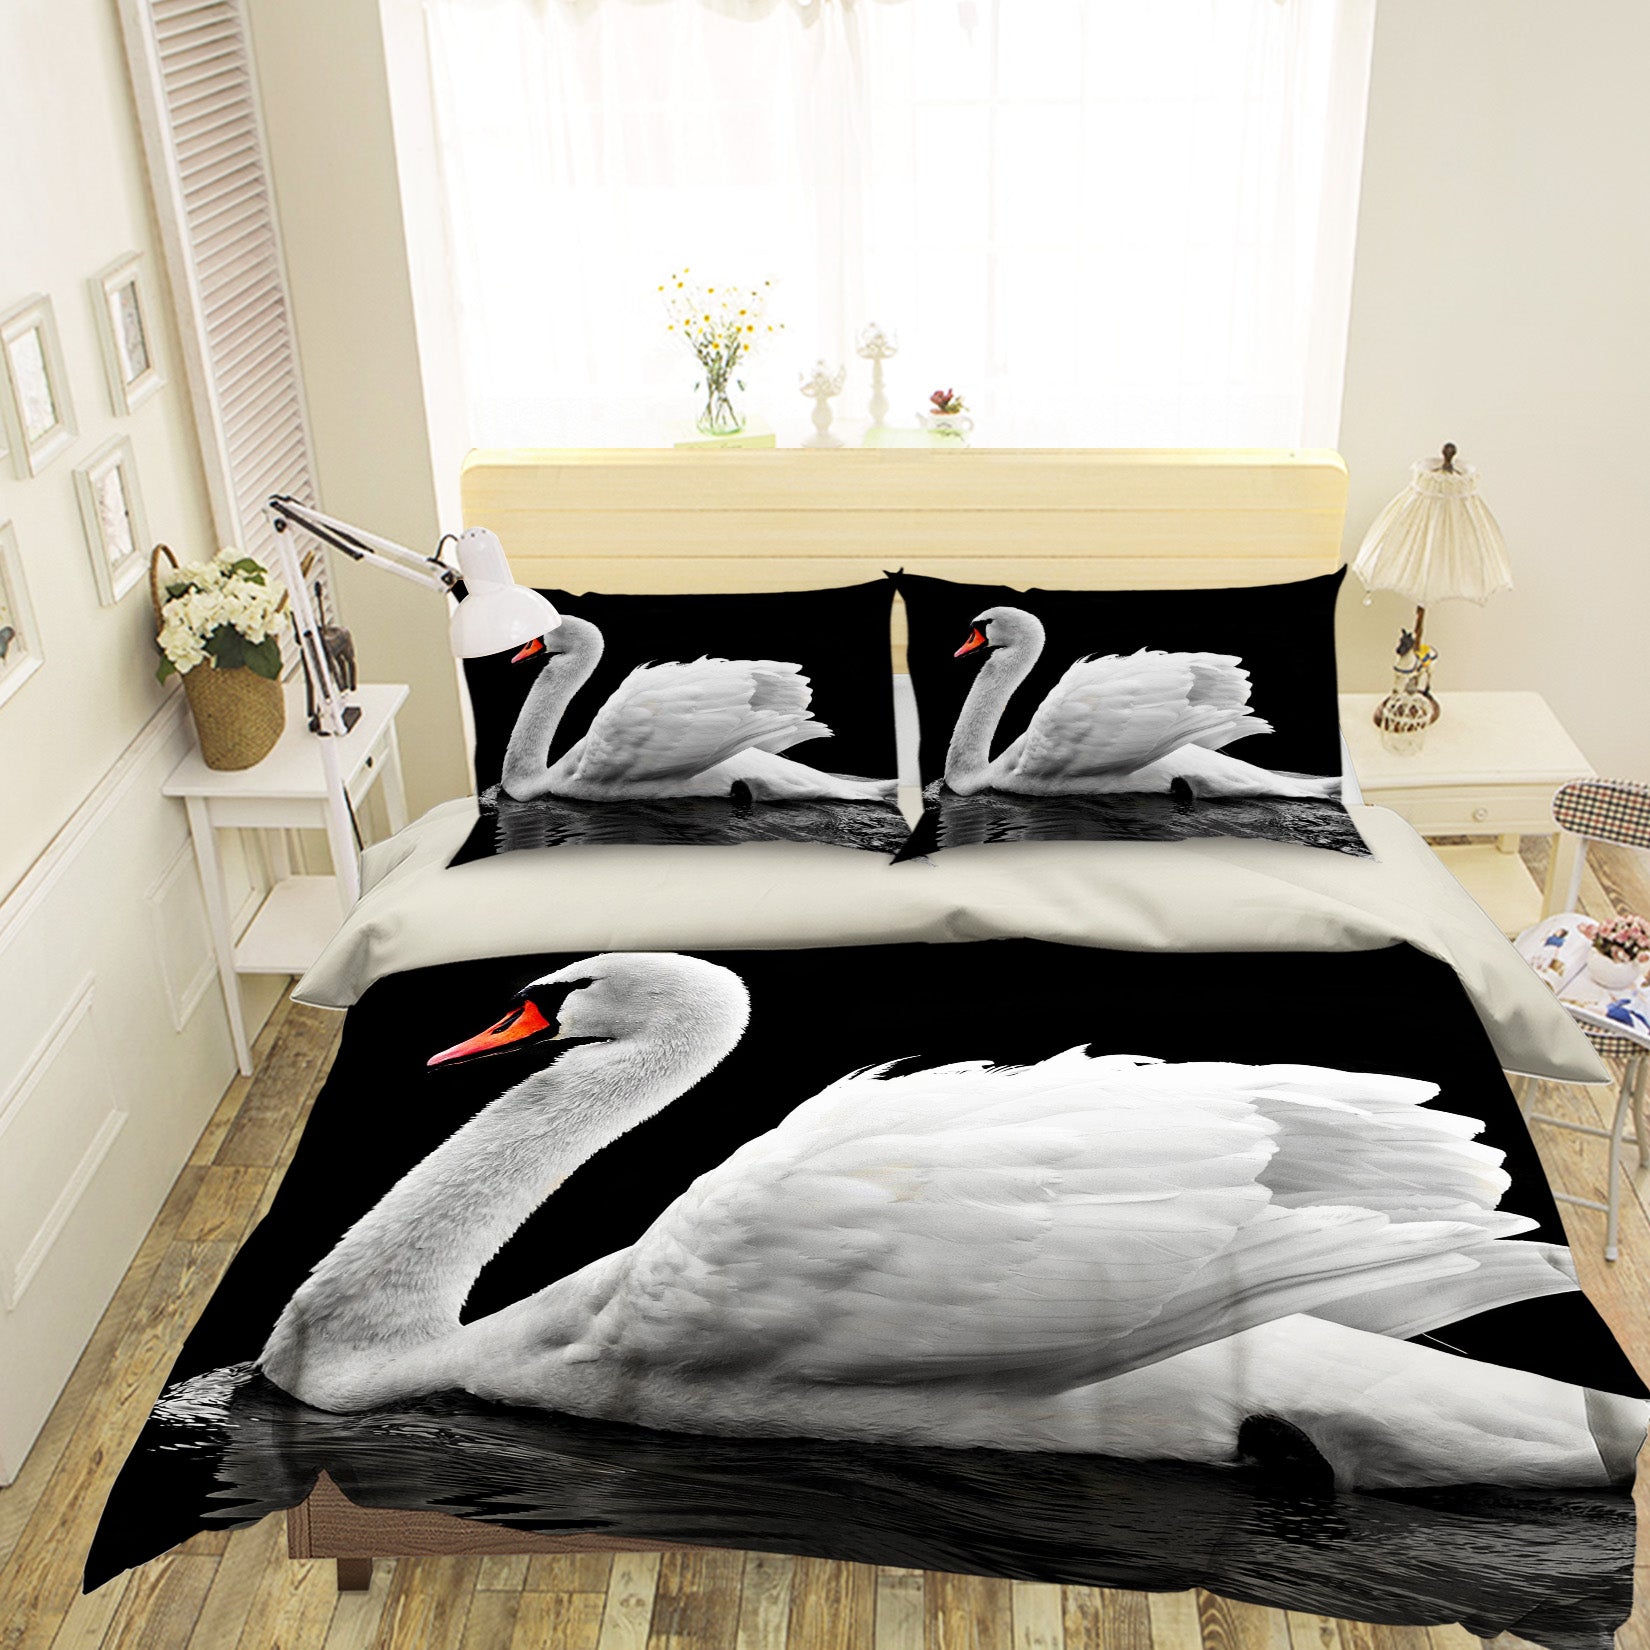 3D White Swan 1947 Bed Pillowcases Quilt